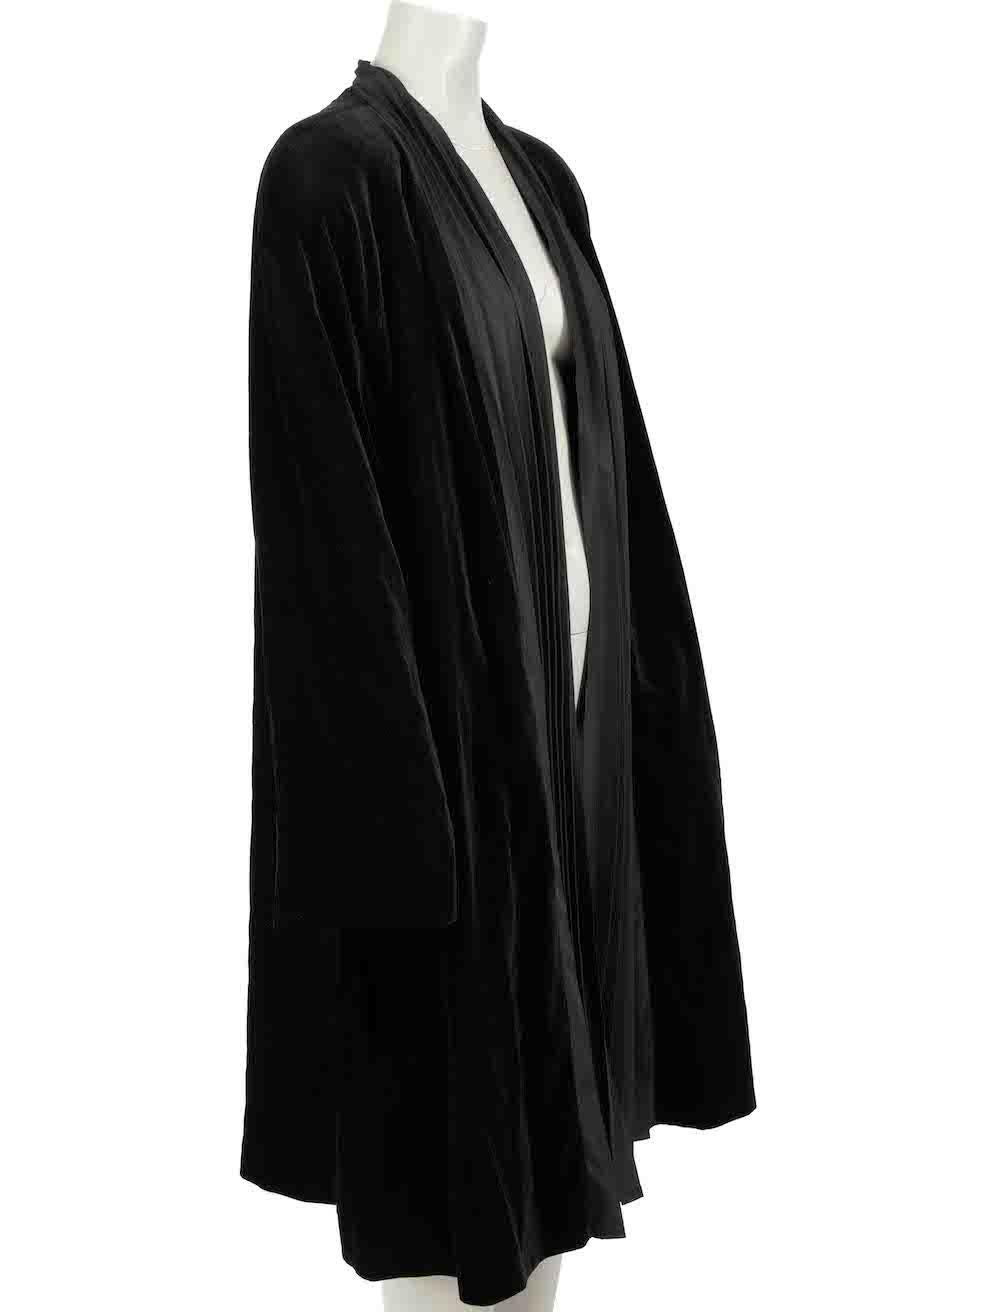 CONDITION is Very good. Minimal wear to coat is evident. Minimal wear to seams with a handful of stray thread ends at the lining and cuffs on this used Louis F√©raud designer resale item.
 
Details
Vintage
Black
Cotton
Long coat
Pleated detail
Open